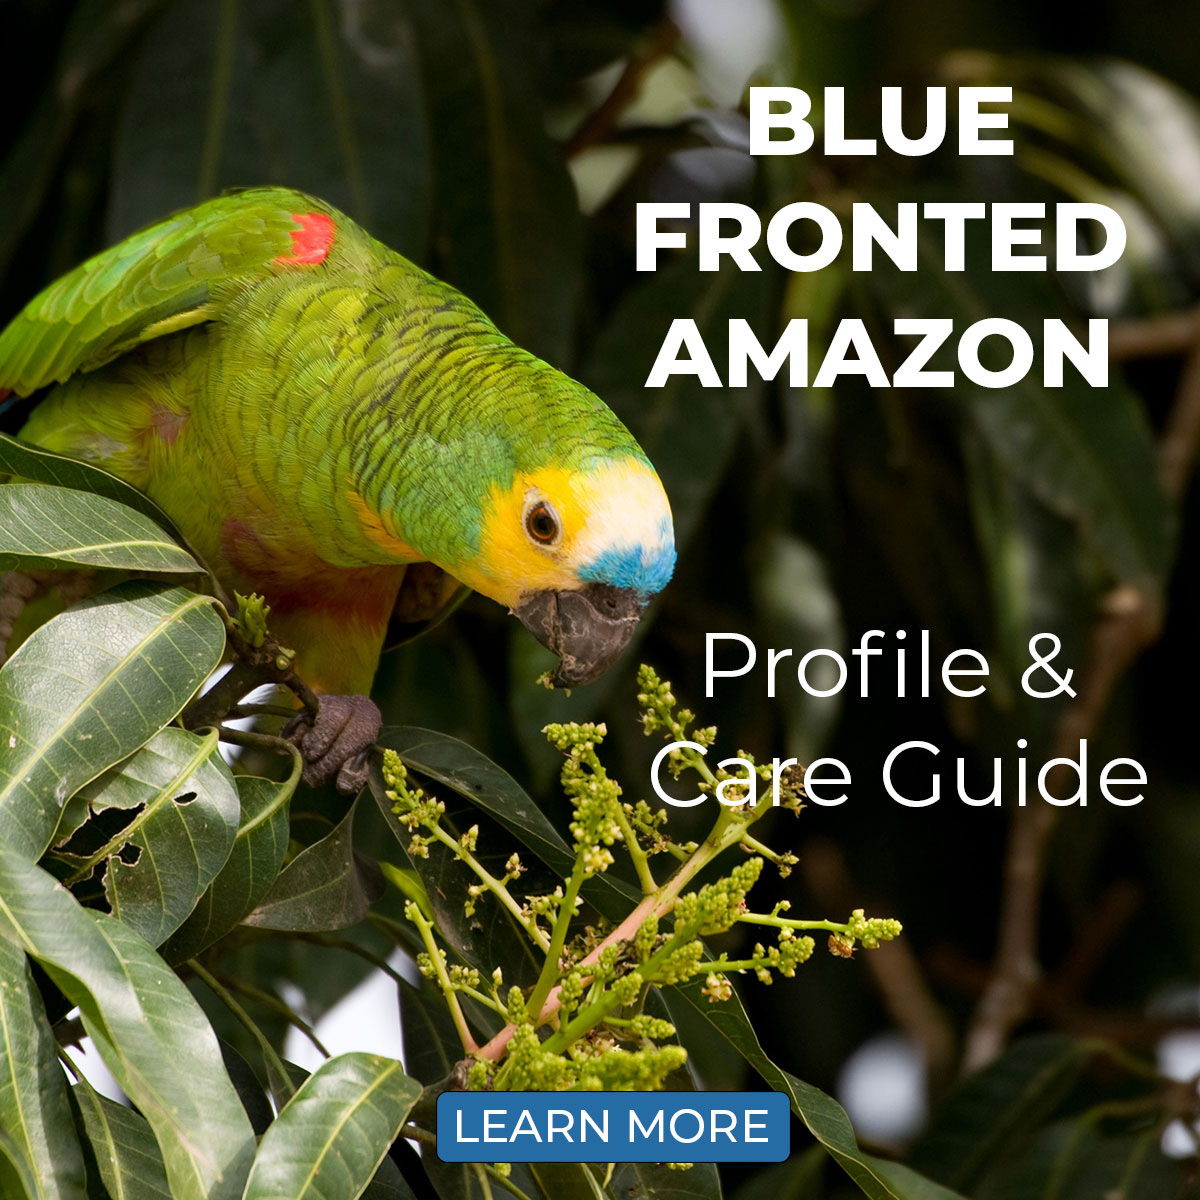 Blue-Fronted Amazon Parrot Profile and Care Guide